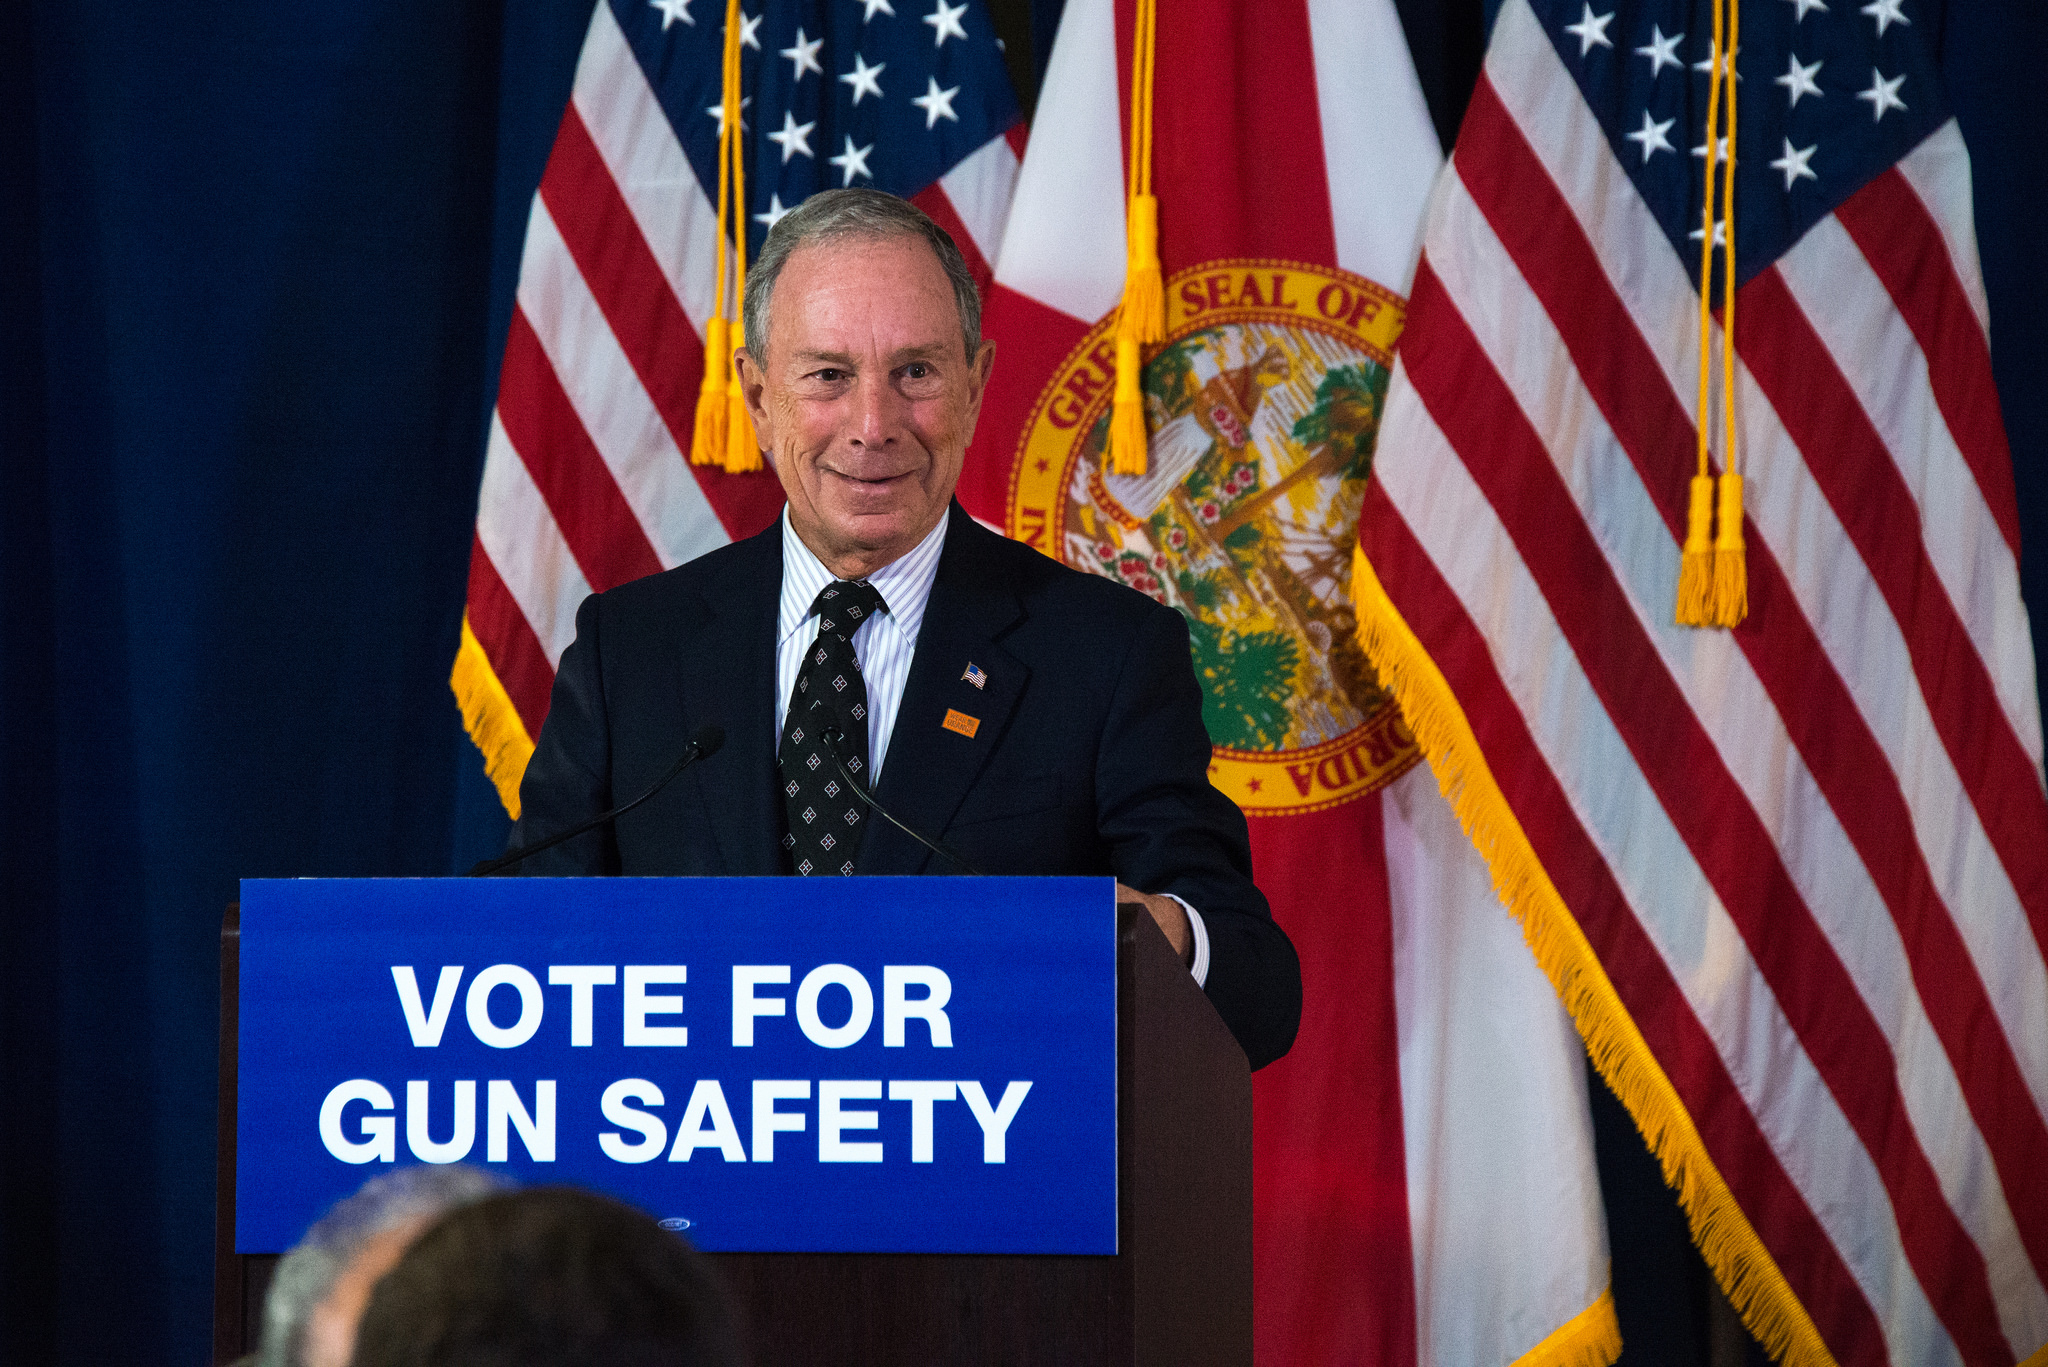 Michael Bloomberg and Parkland Parents Demand Change, Inspire Others to Vote at Event